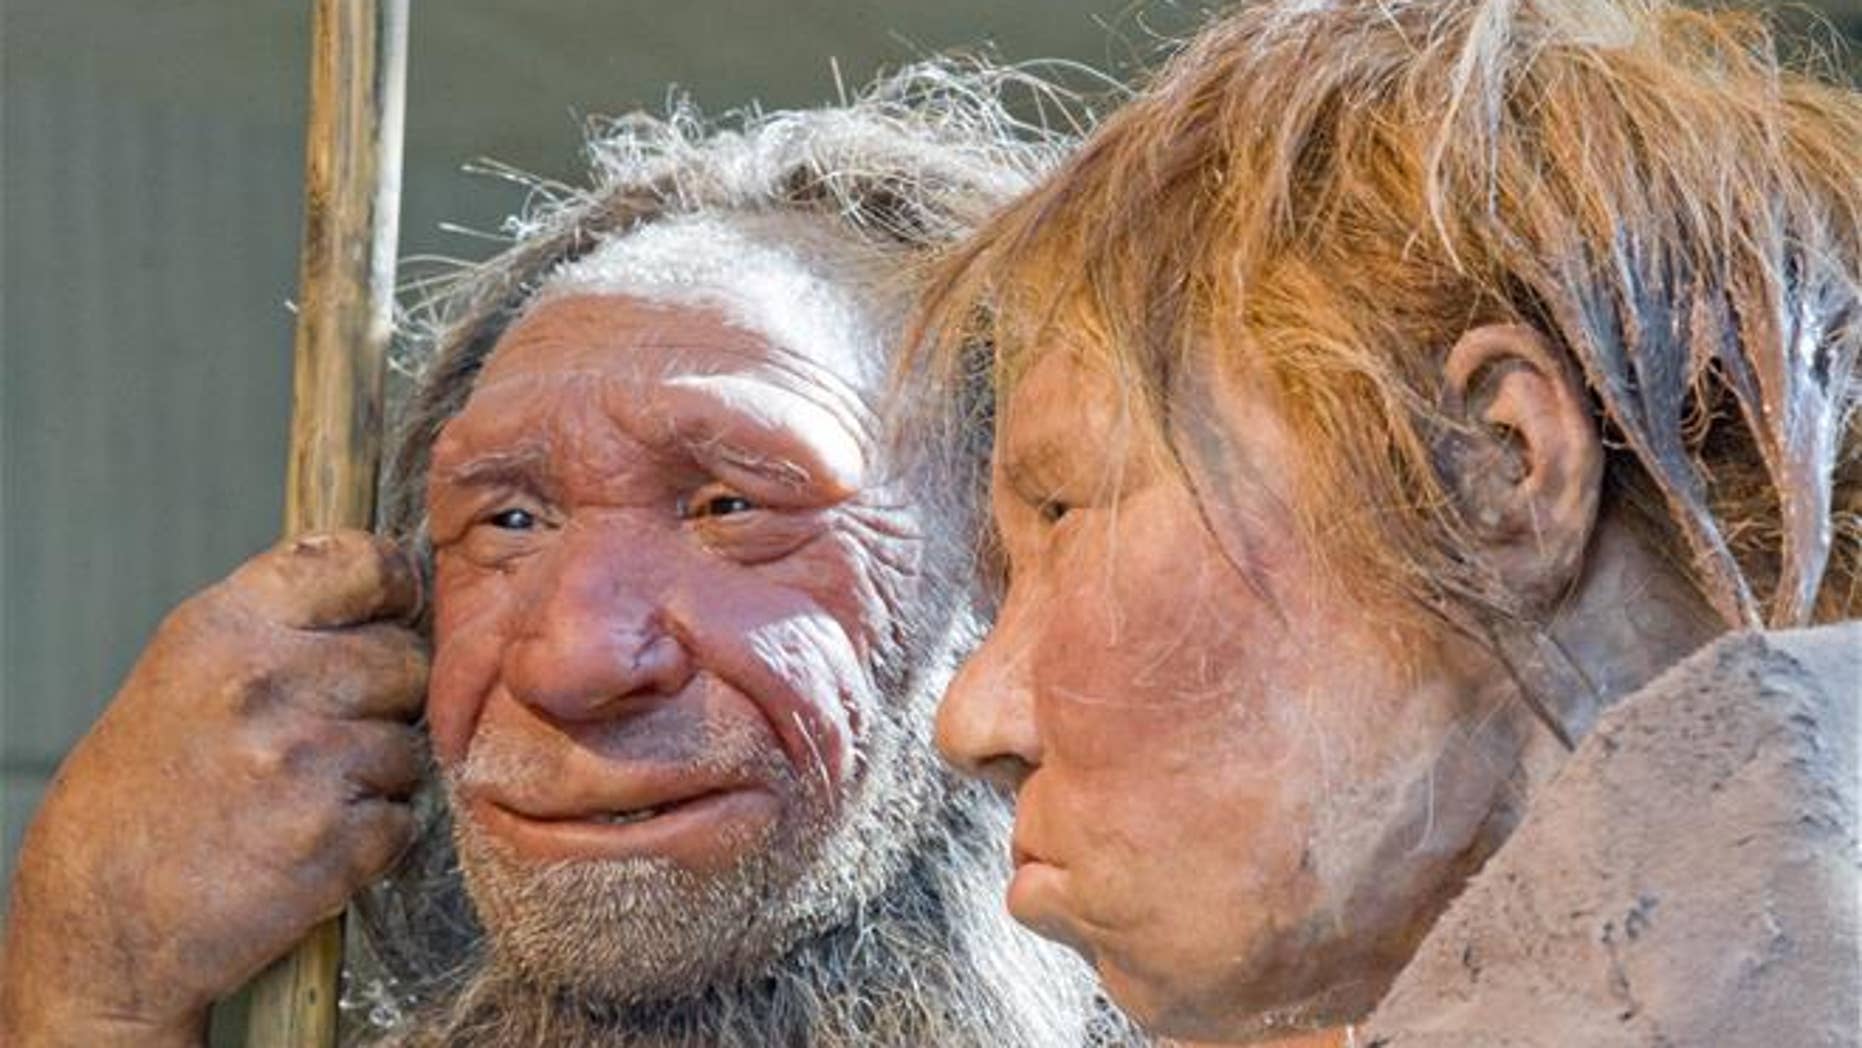 File photo - This March 20, 2009 photo shows reconstructions of a Neanderthal man named 